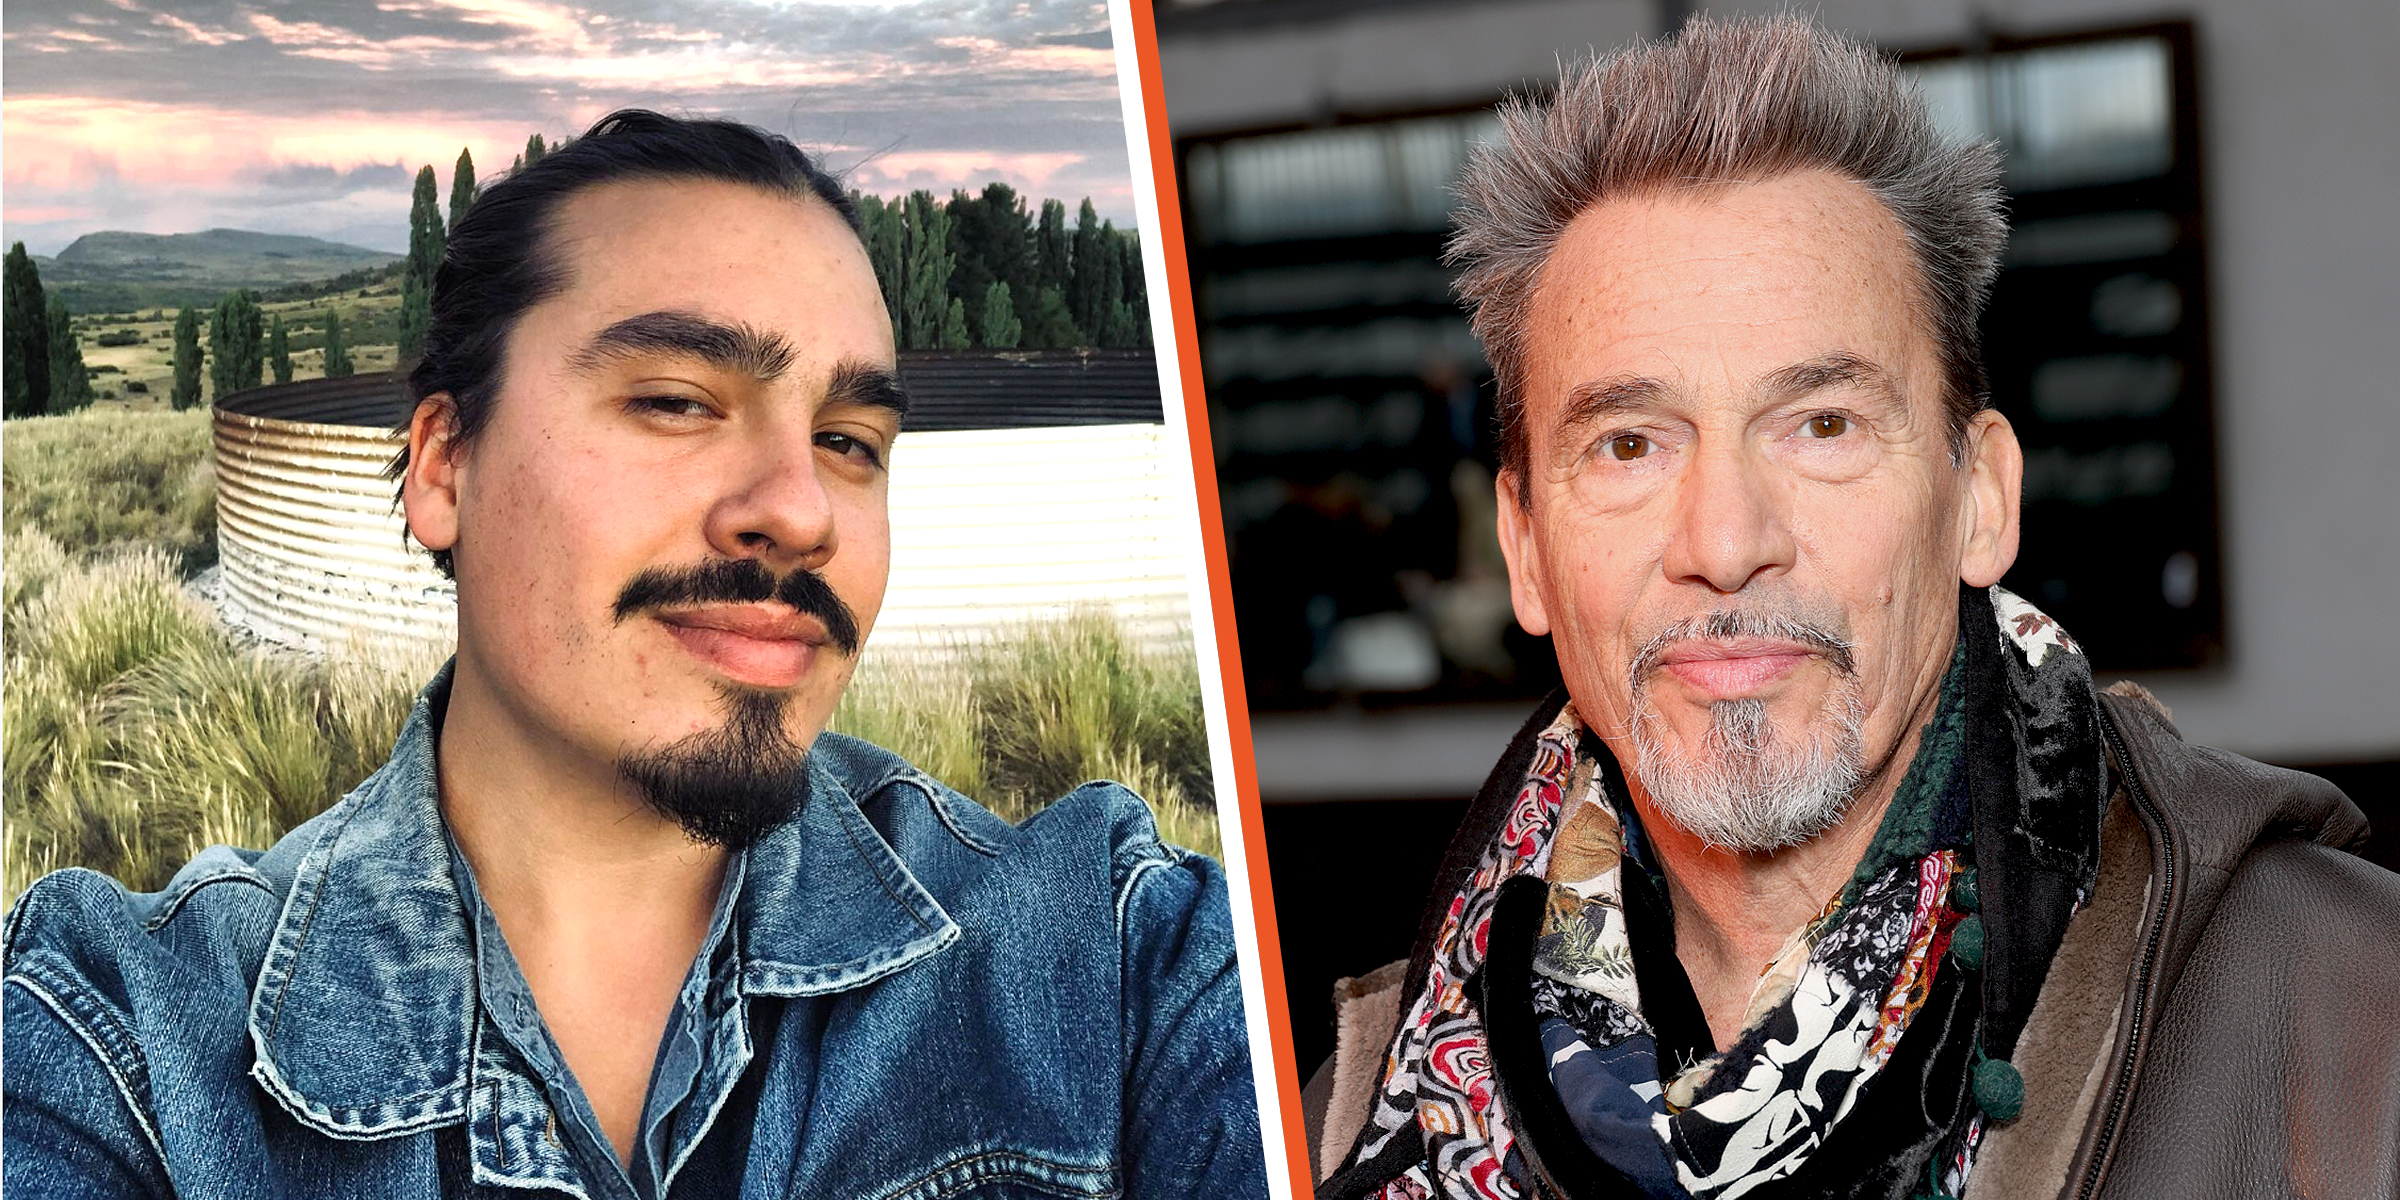 Florent Pagny et Inca Pagny | Source : Getty Images